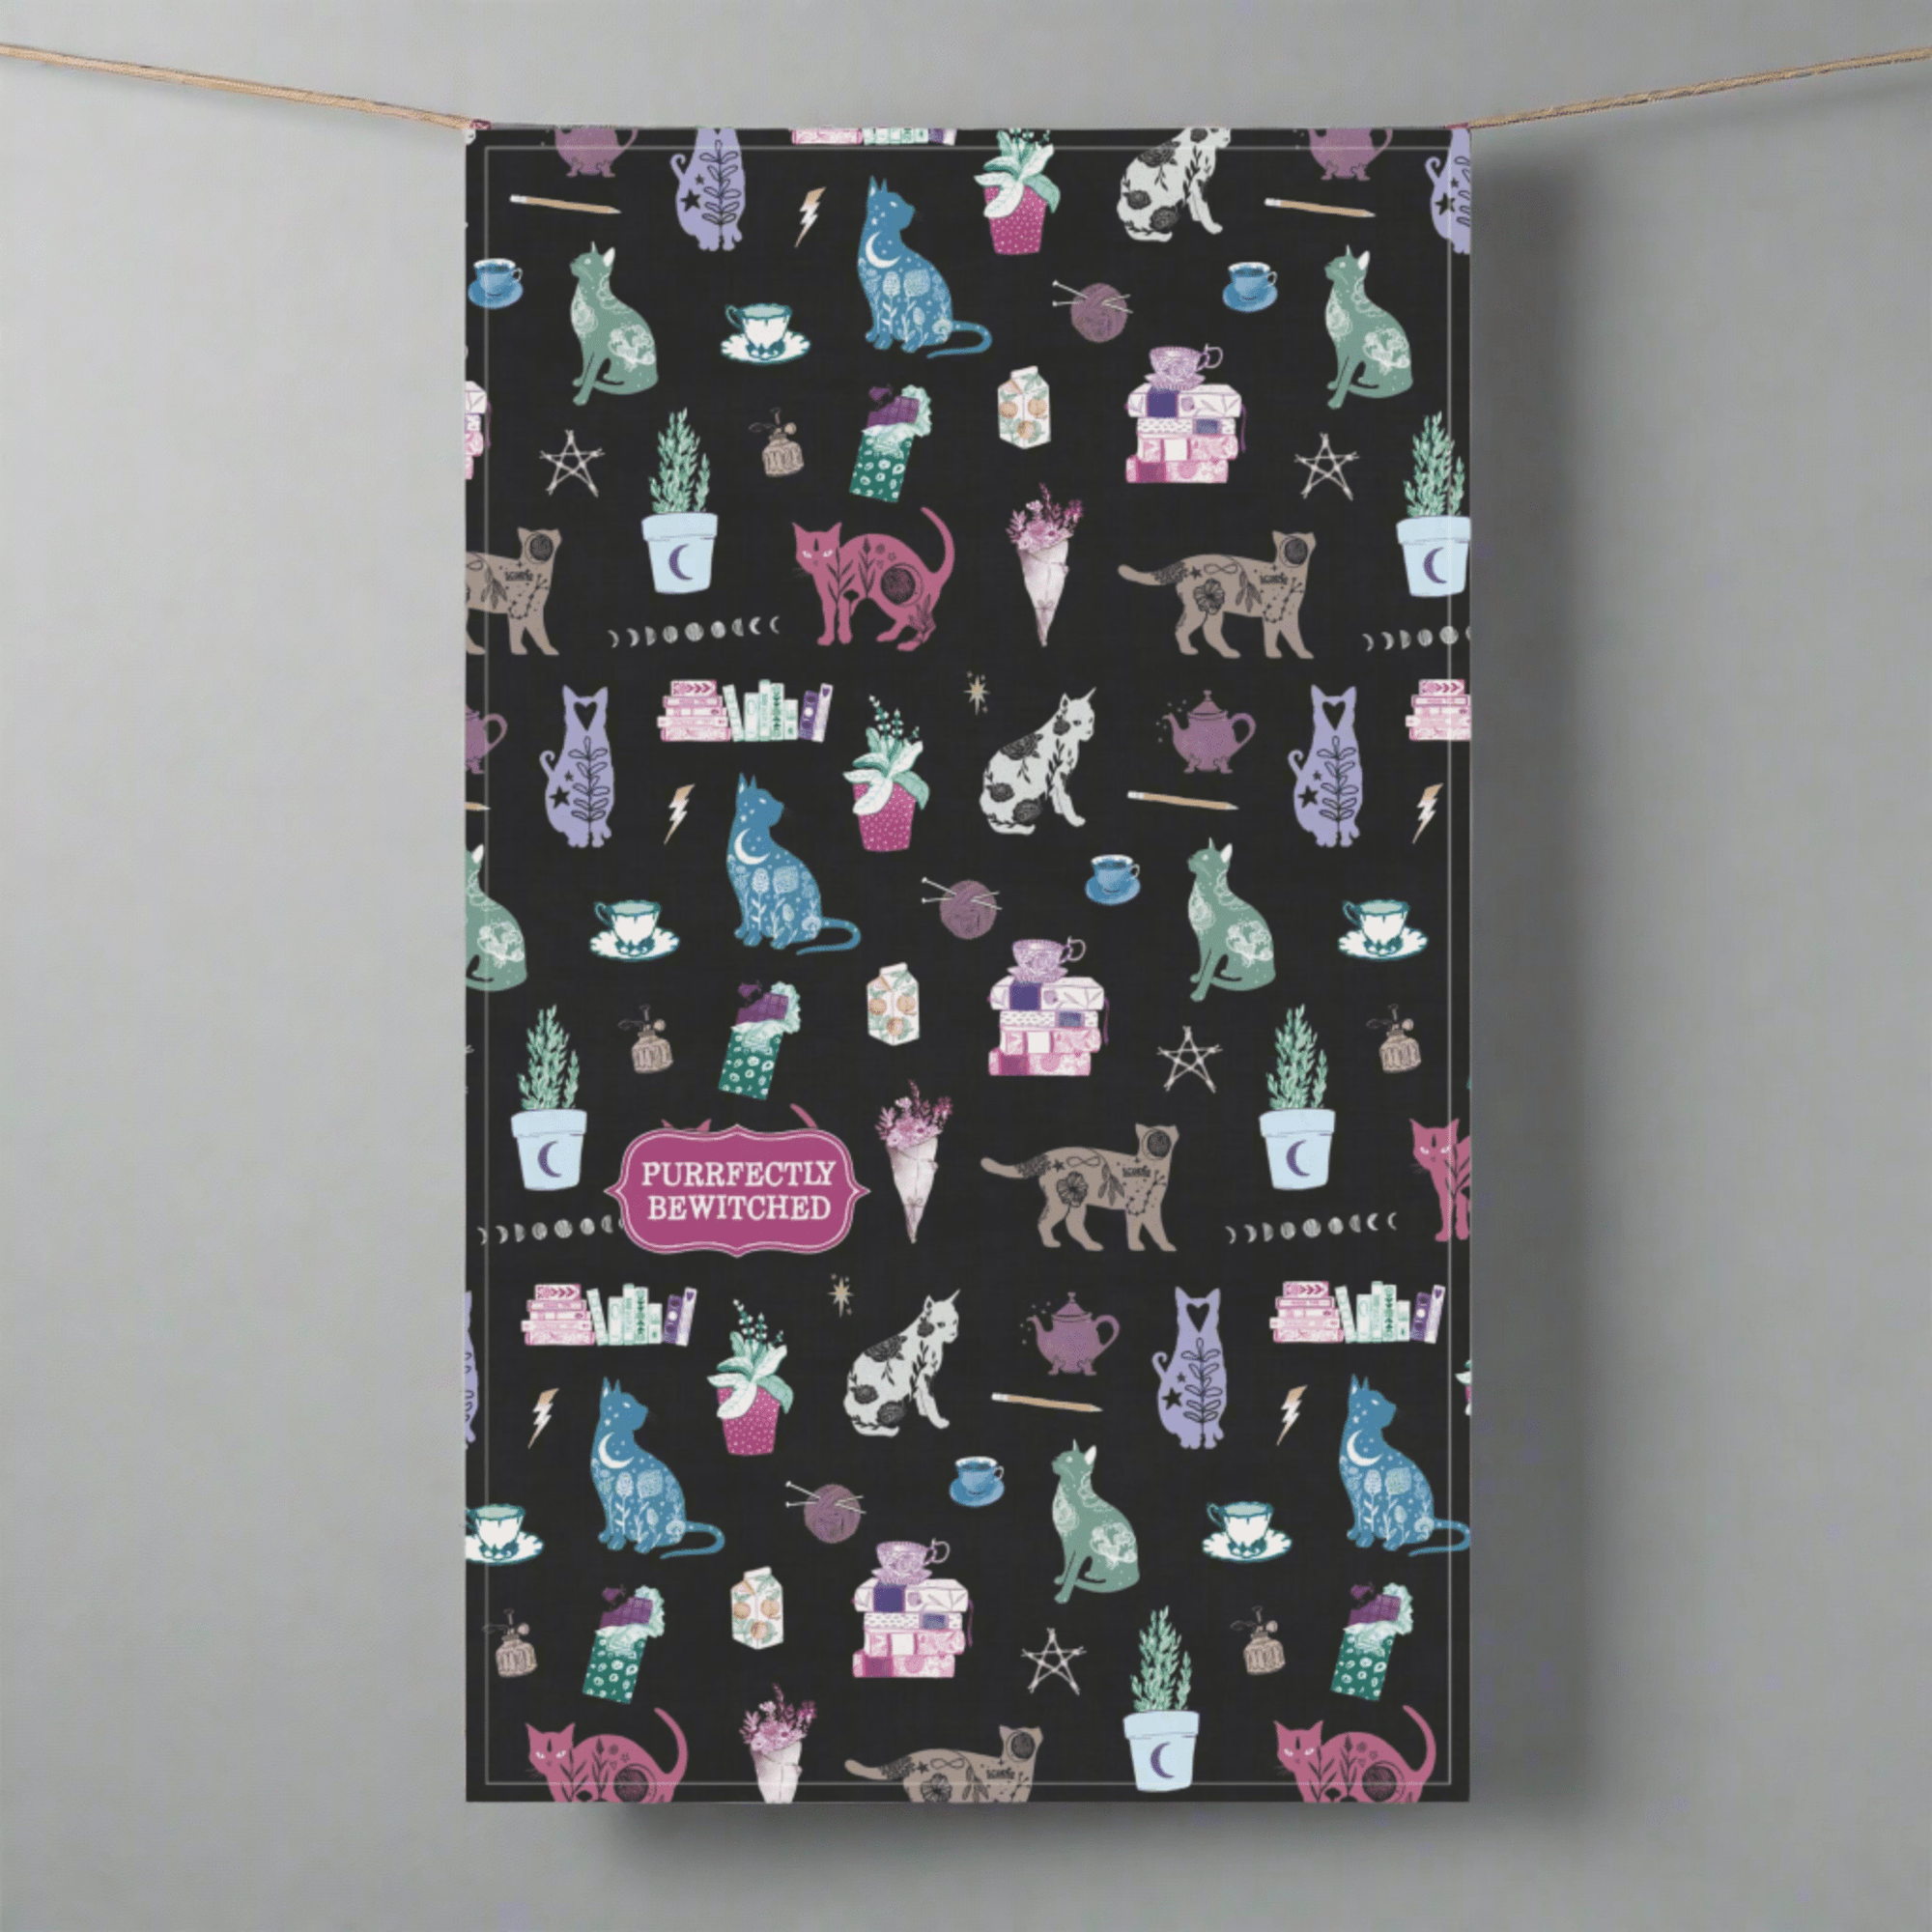 Purrfectly Bewitched Kitchen Towel